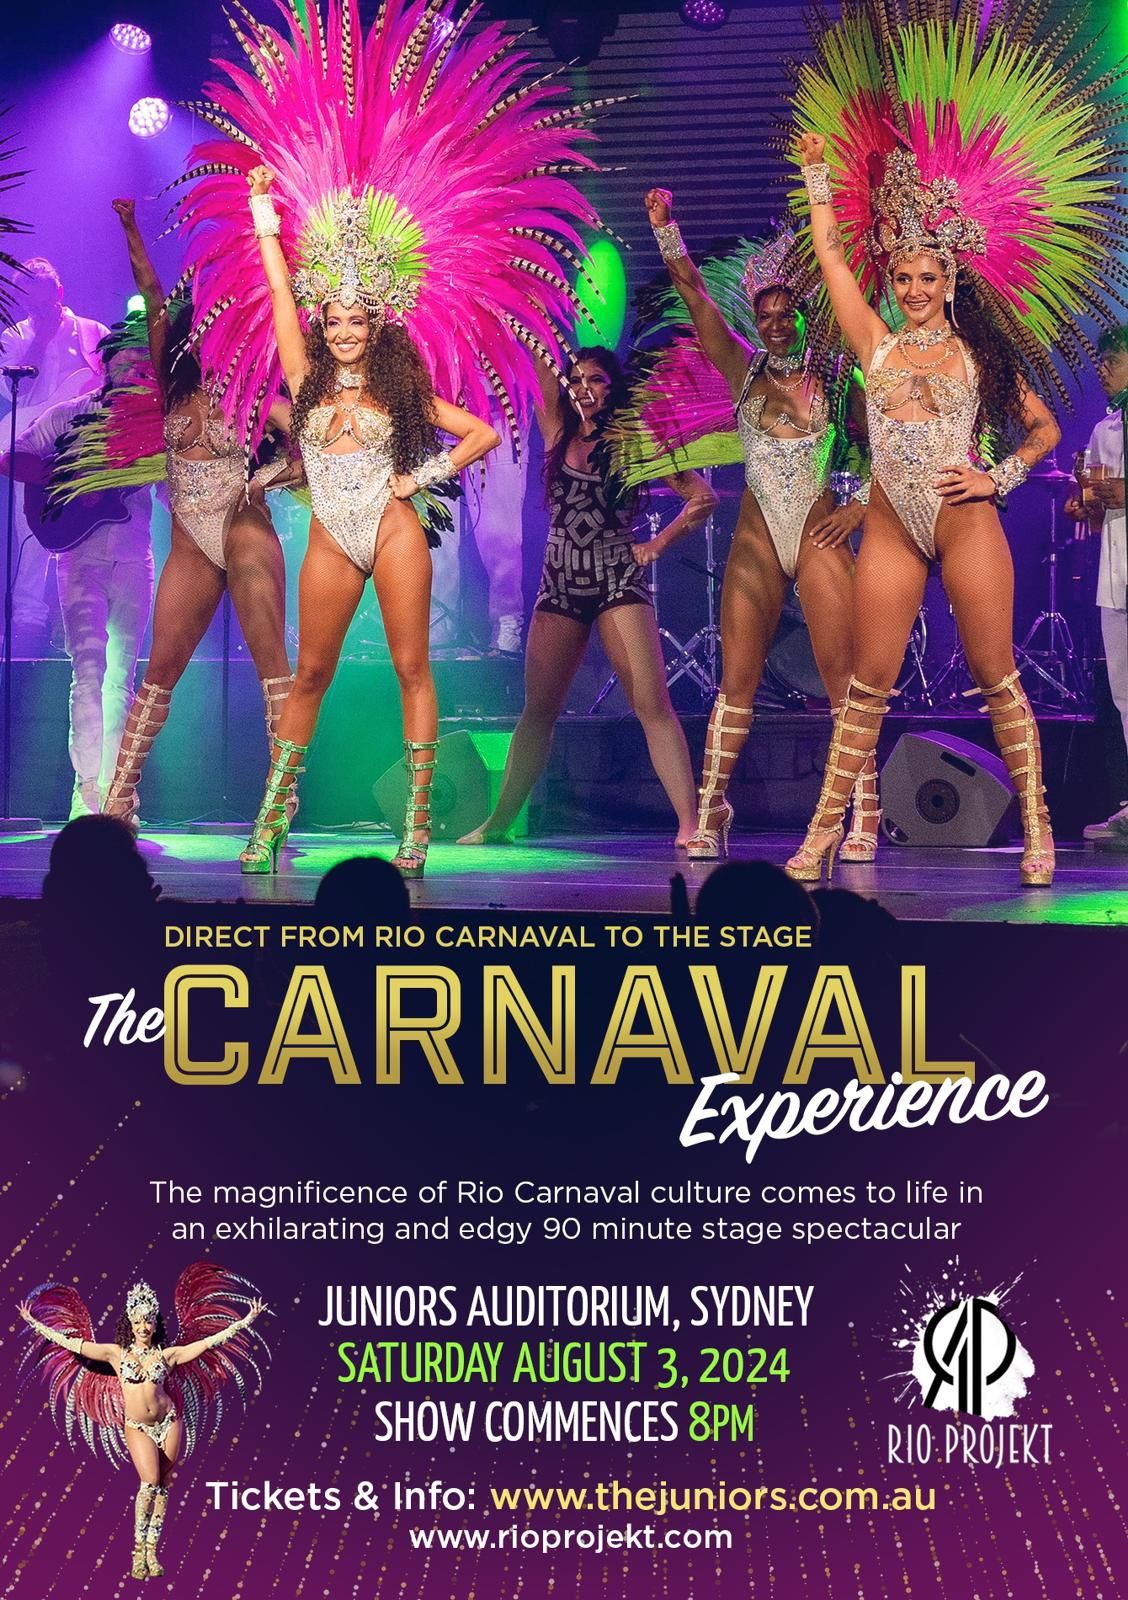 The Carnaval Experience